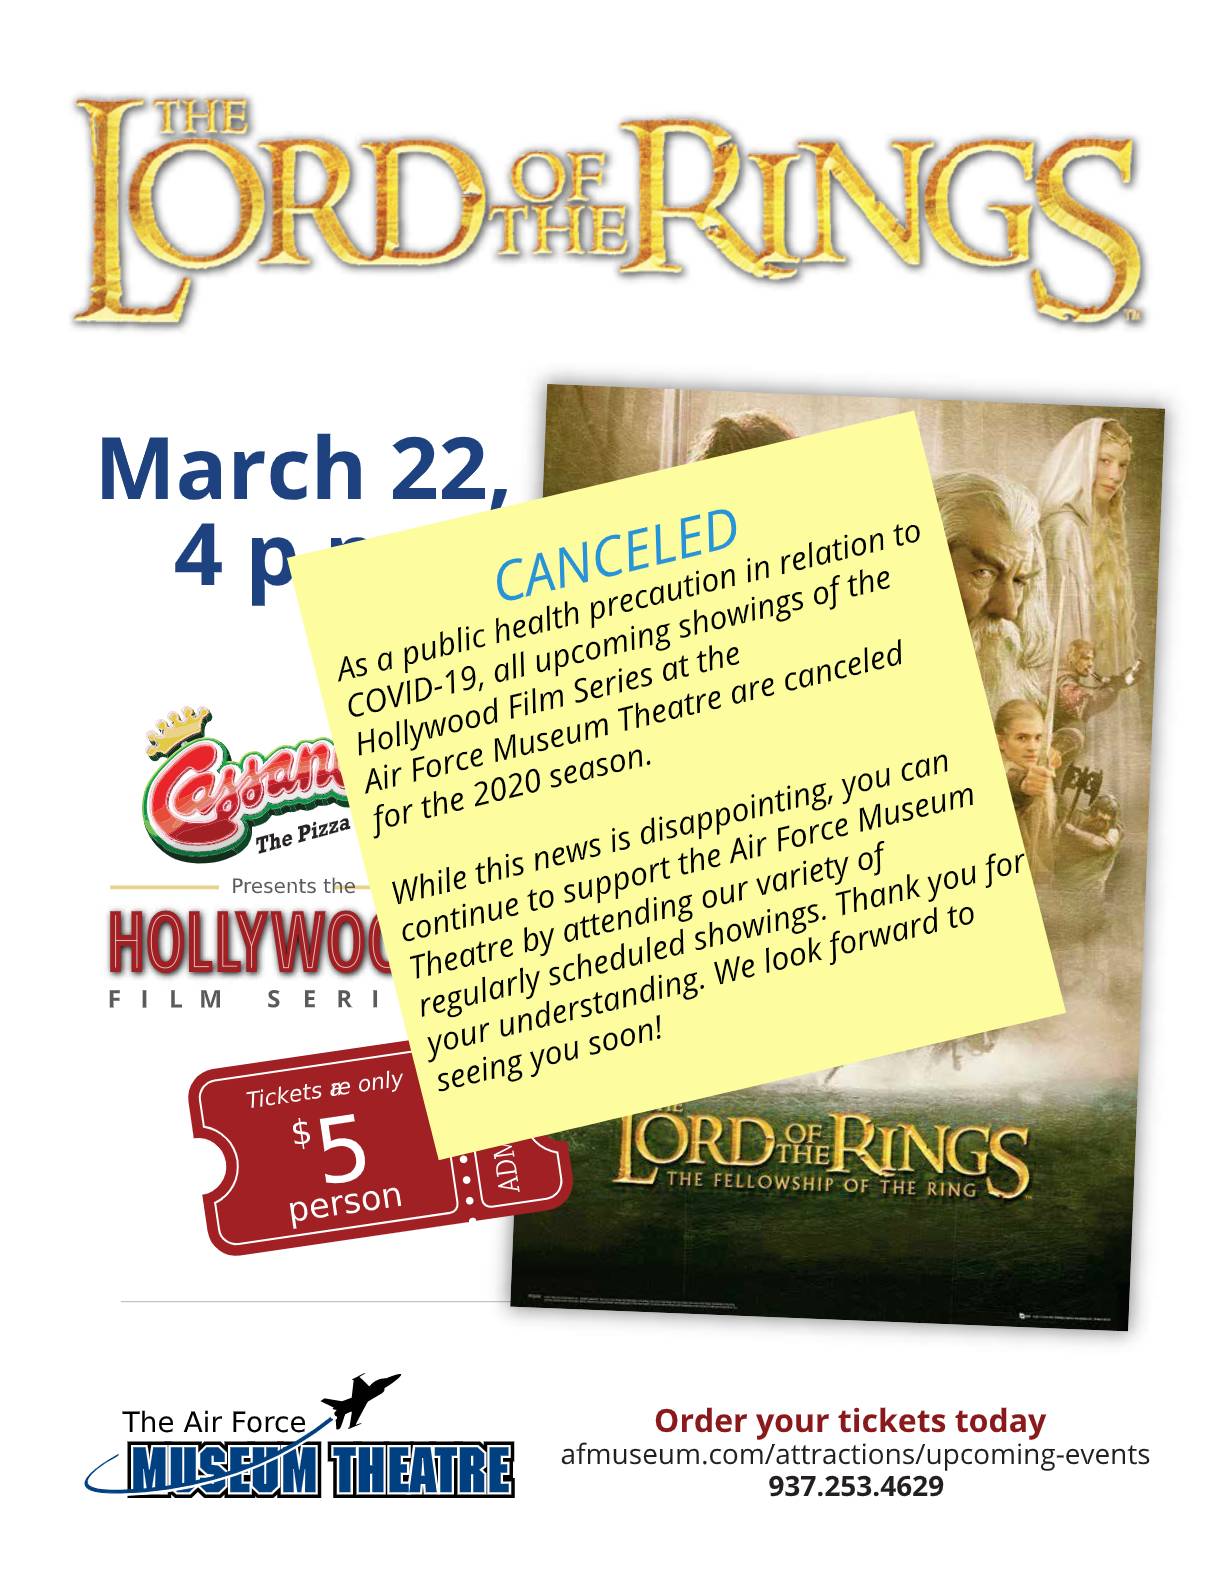 Lord of the Rings flier CANCELED